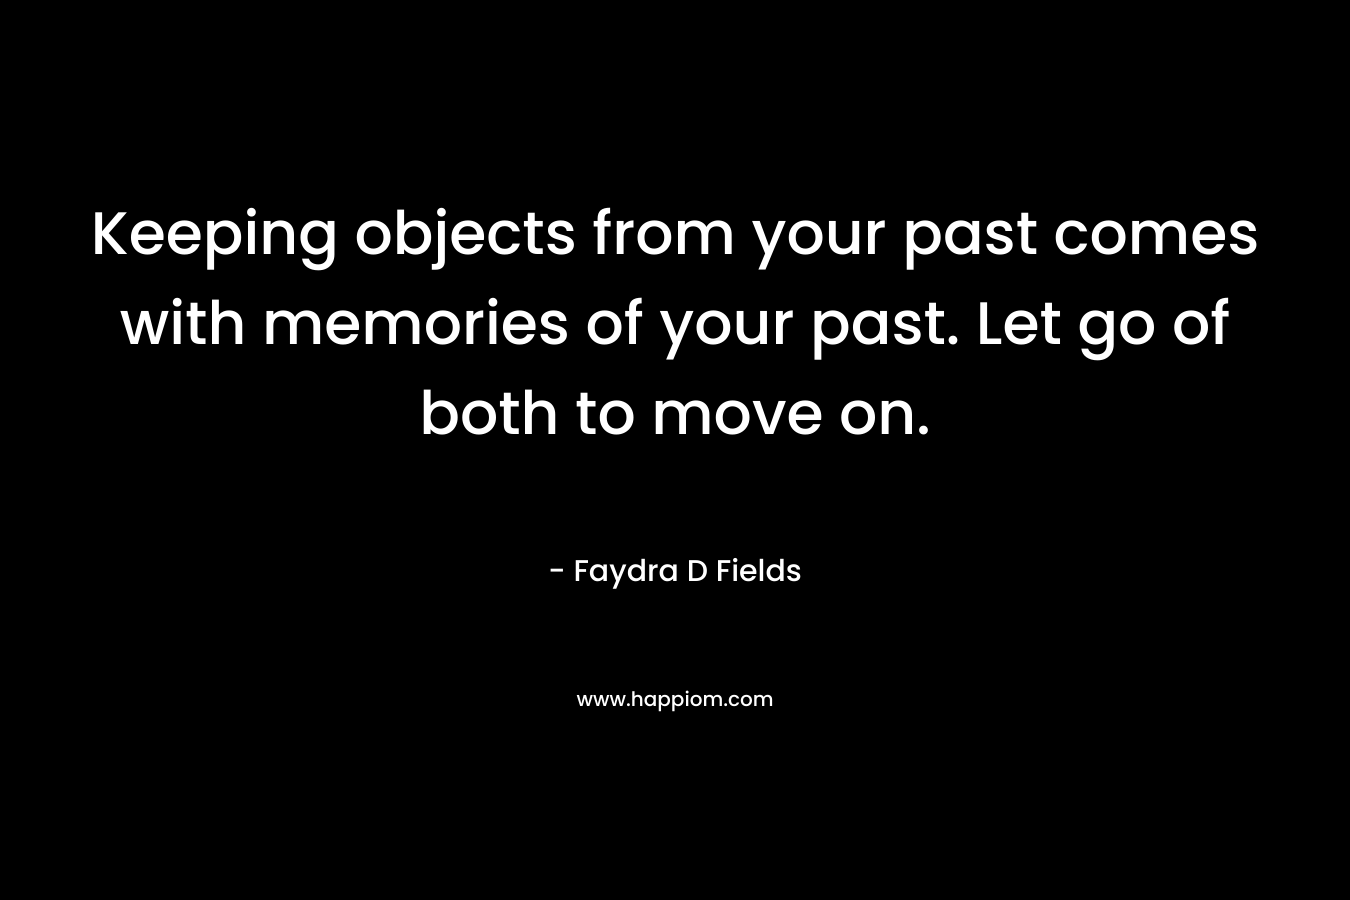 Keeping objects from your past comes with memories of your past. Let go of both to move on.